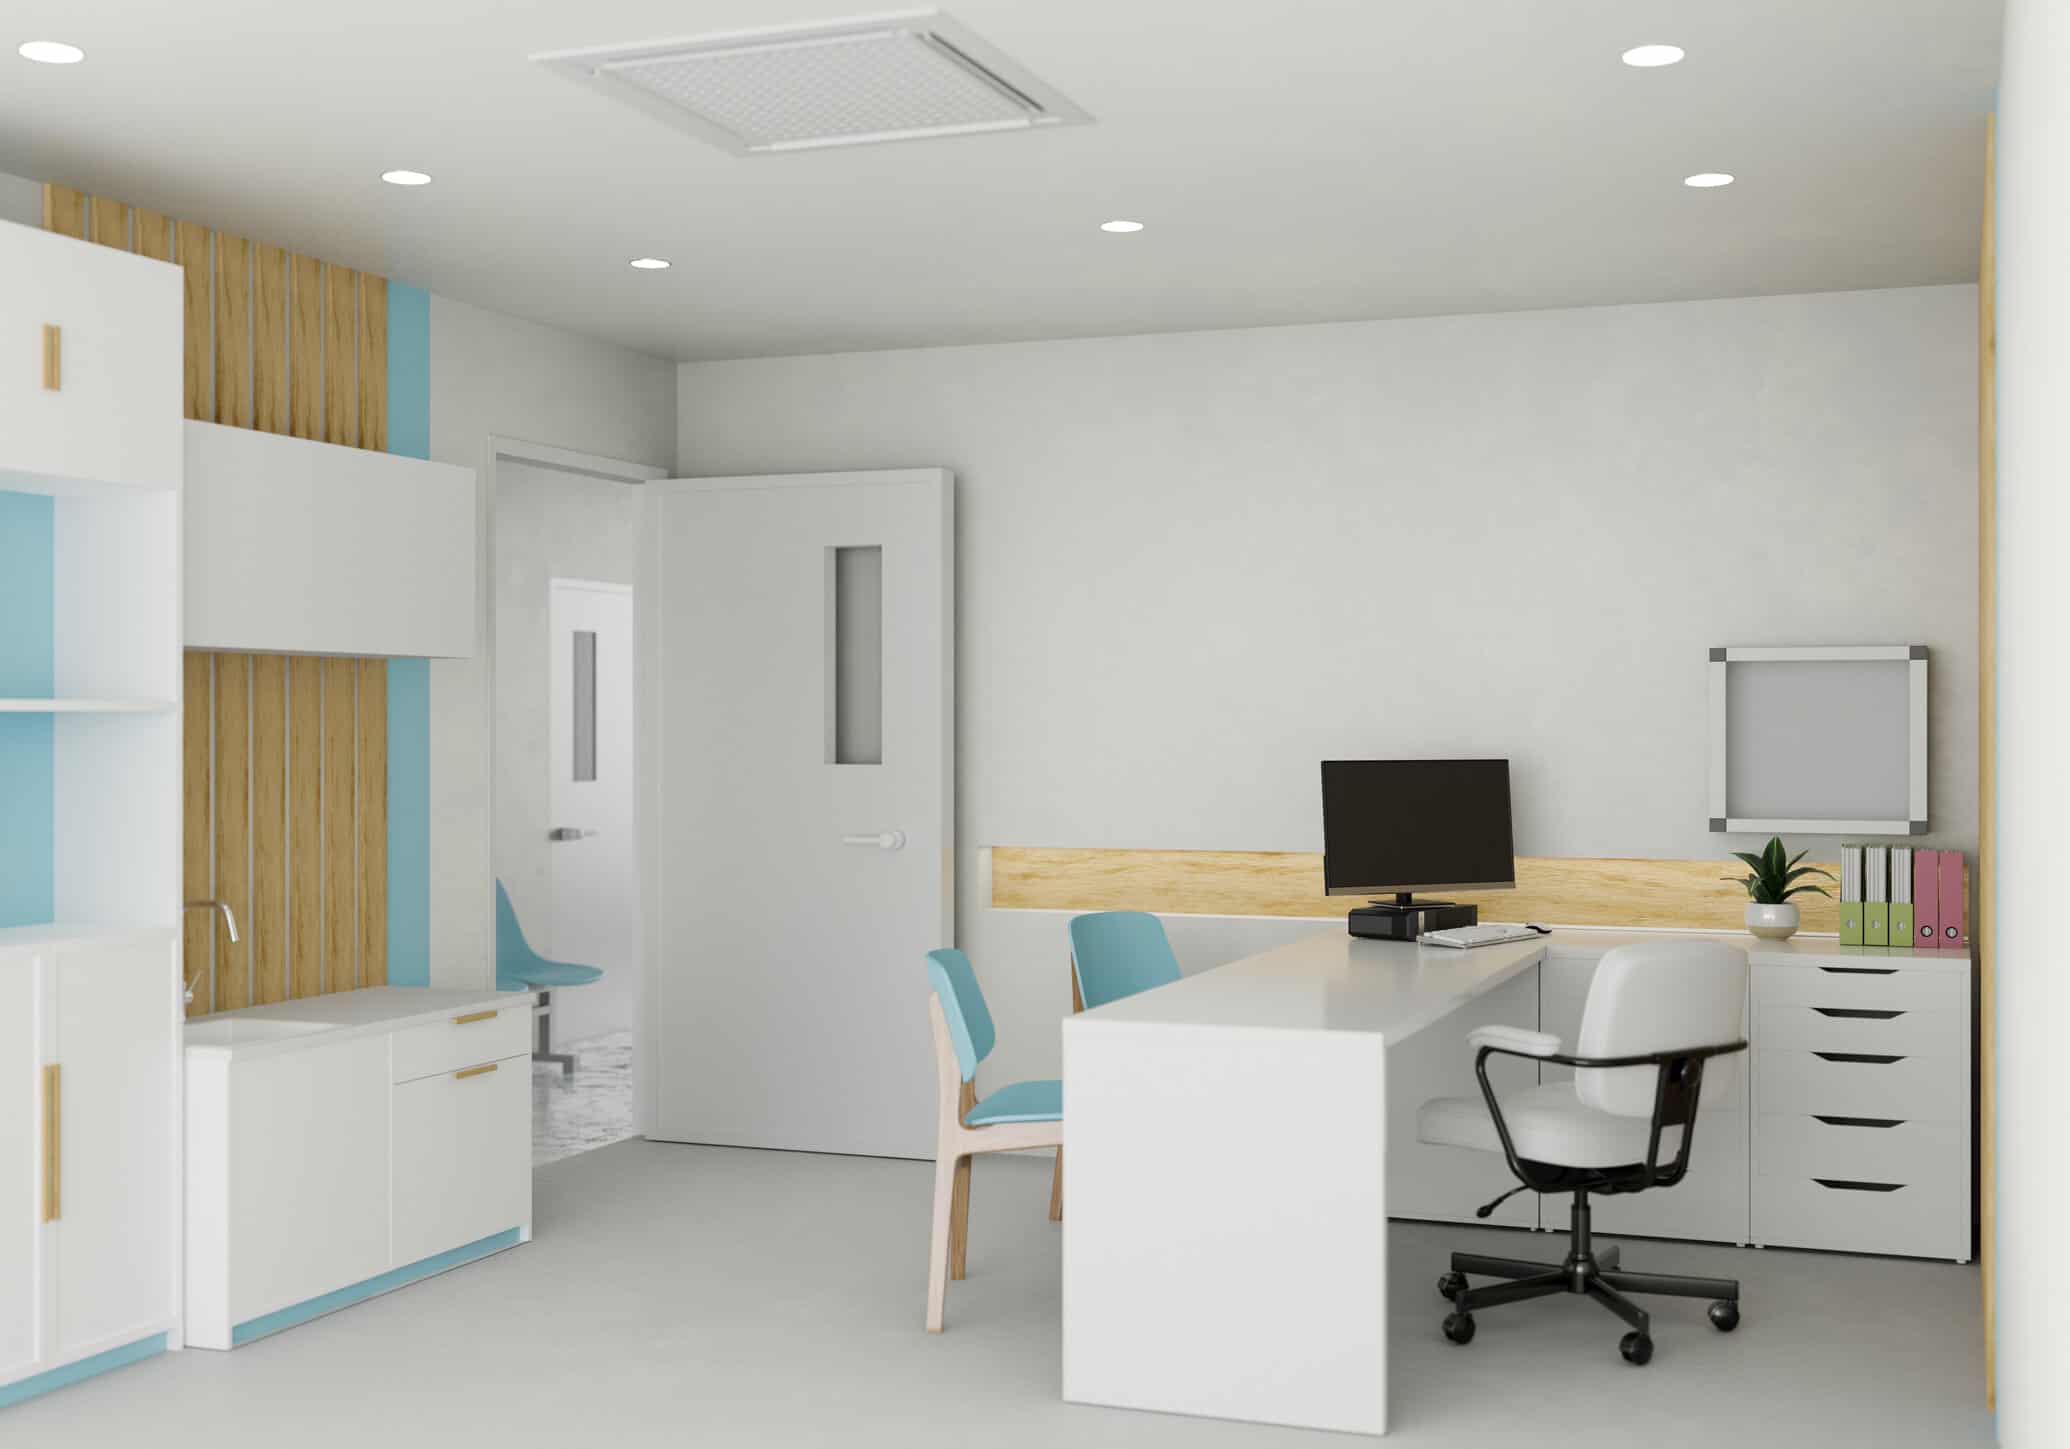 white and bright doctor office or medical office interior design with computer on doctor office desk, files cabinet, and decor.